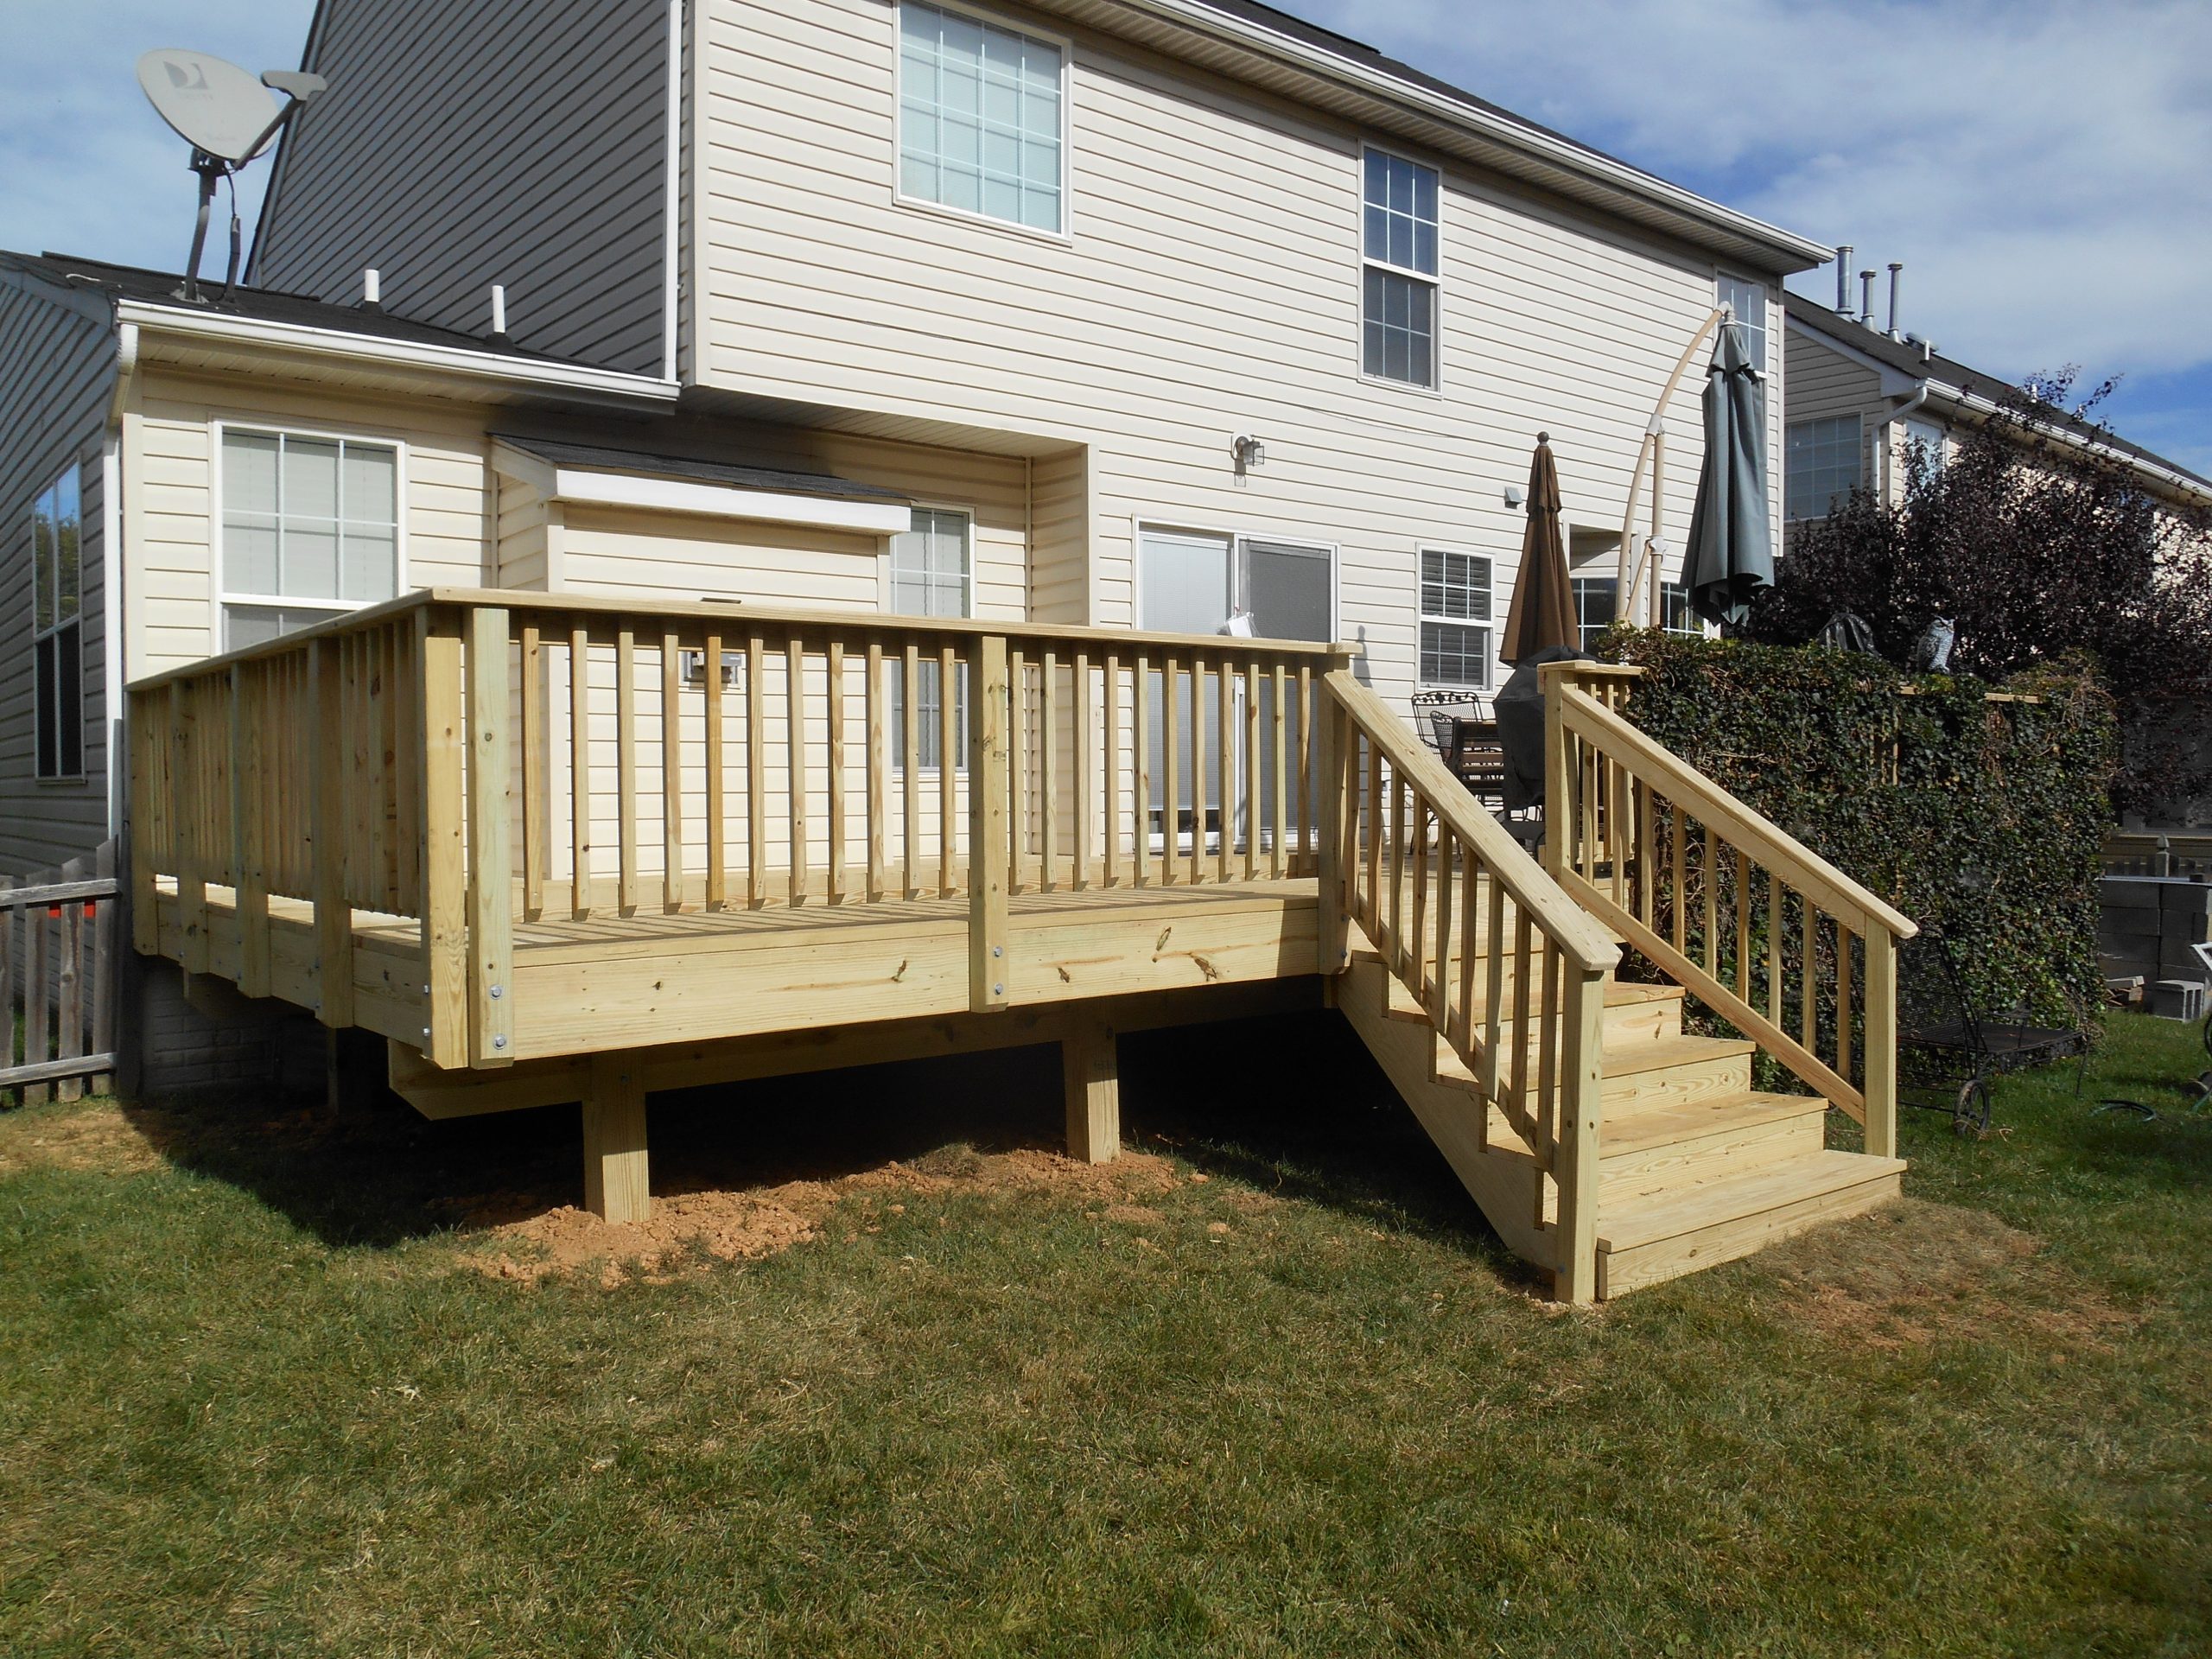 Choosing a Railing for Your Deck